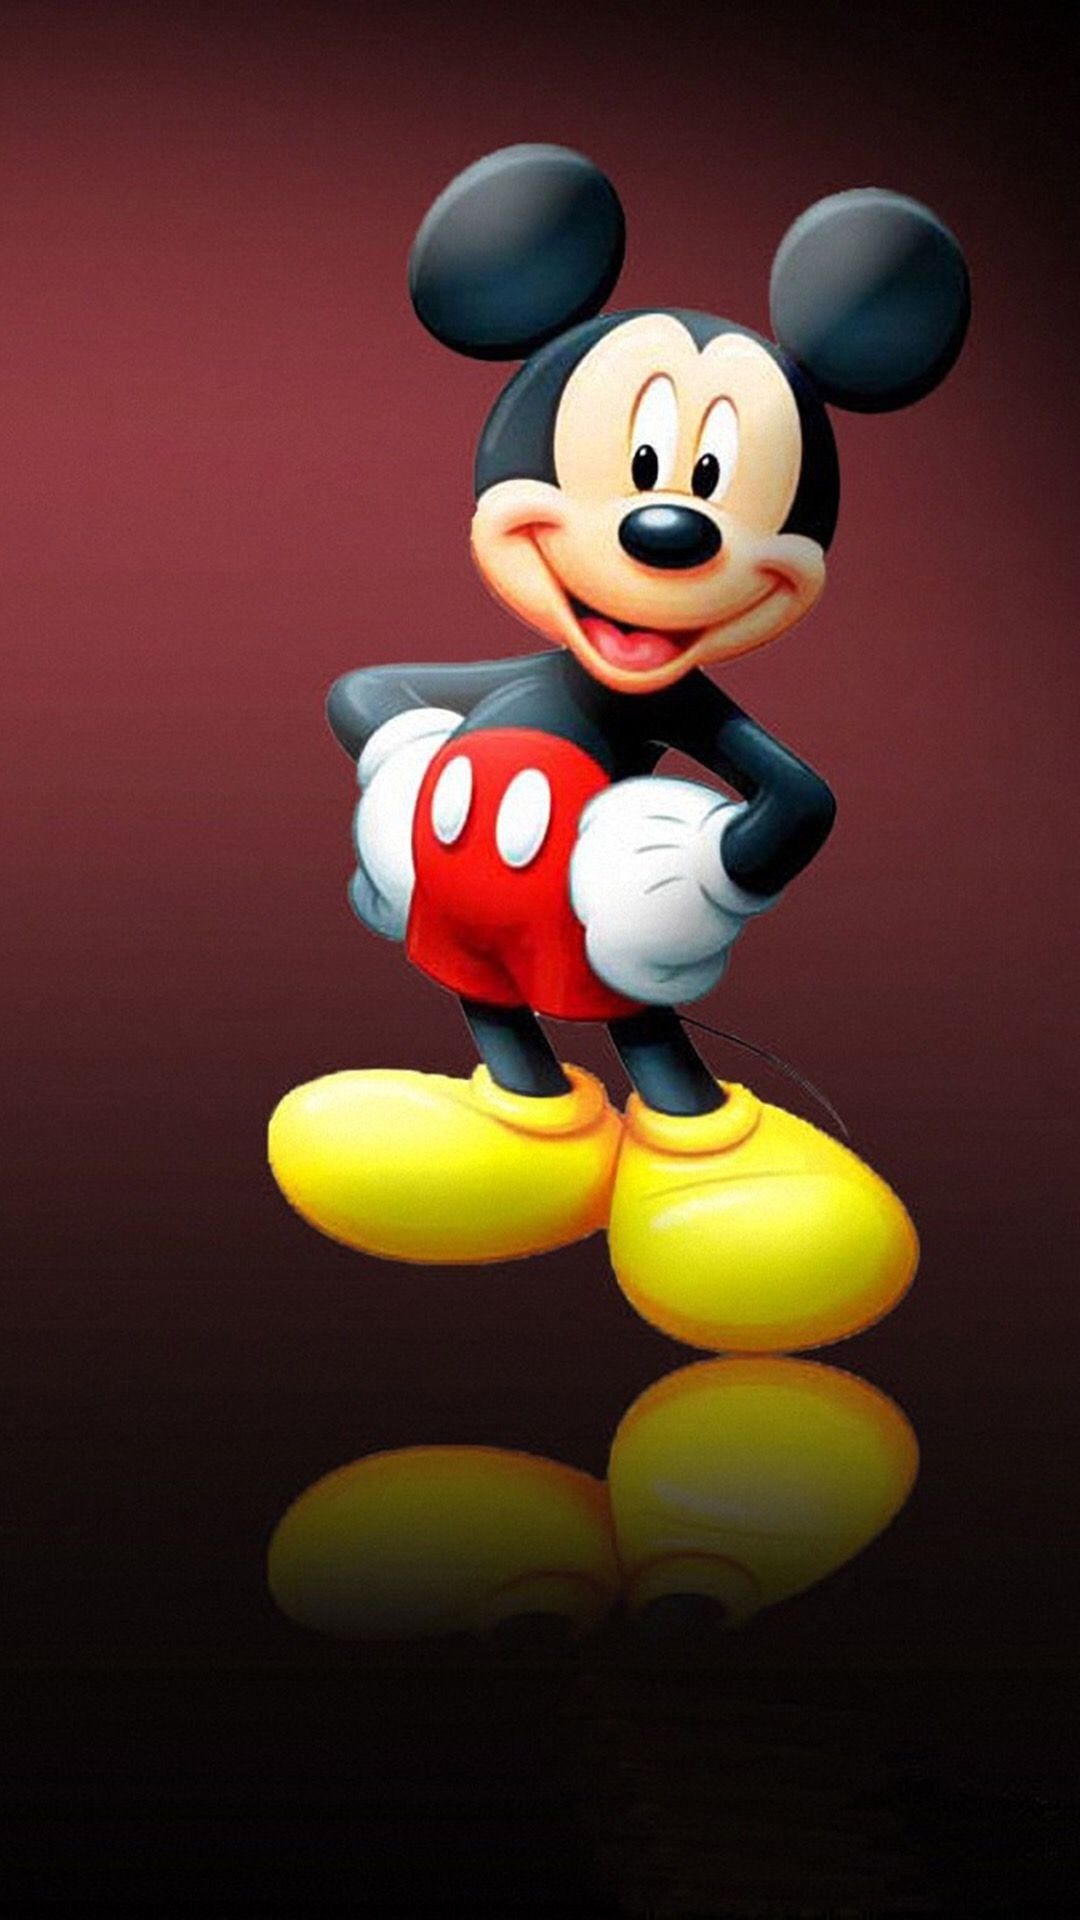 1080x1920 Mickey Mouse iPhone 6 Wallpaper on WallpaperBat